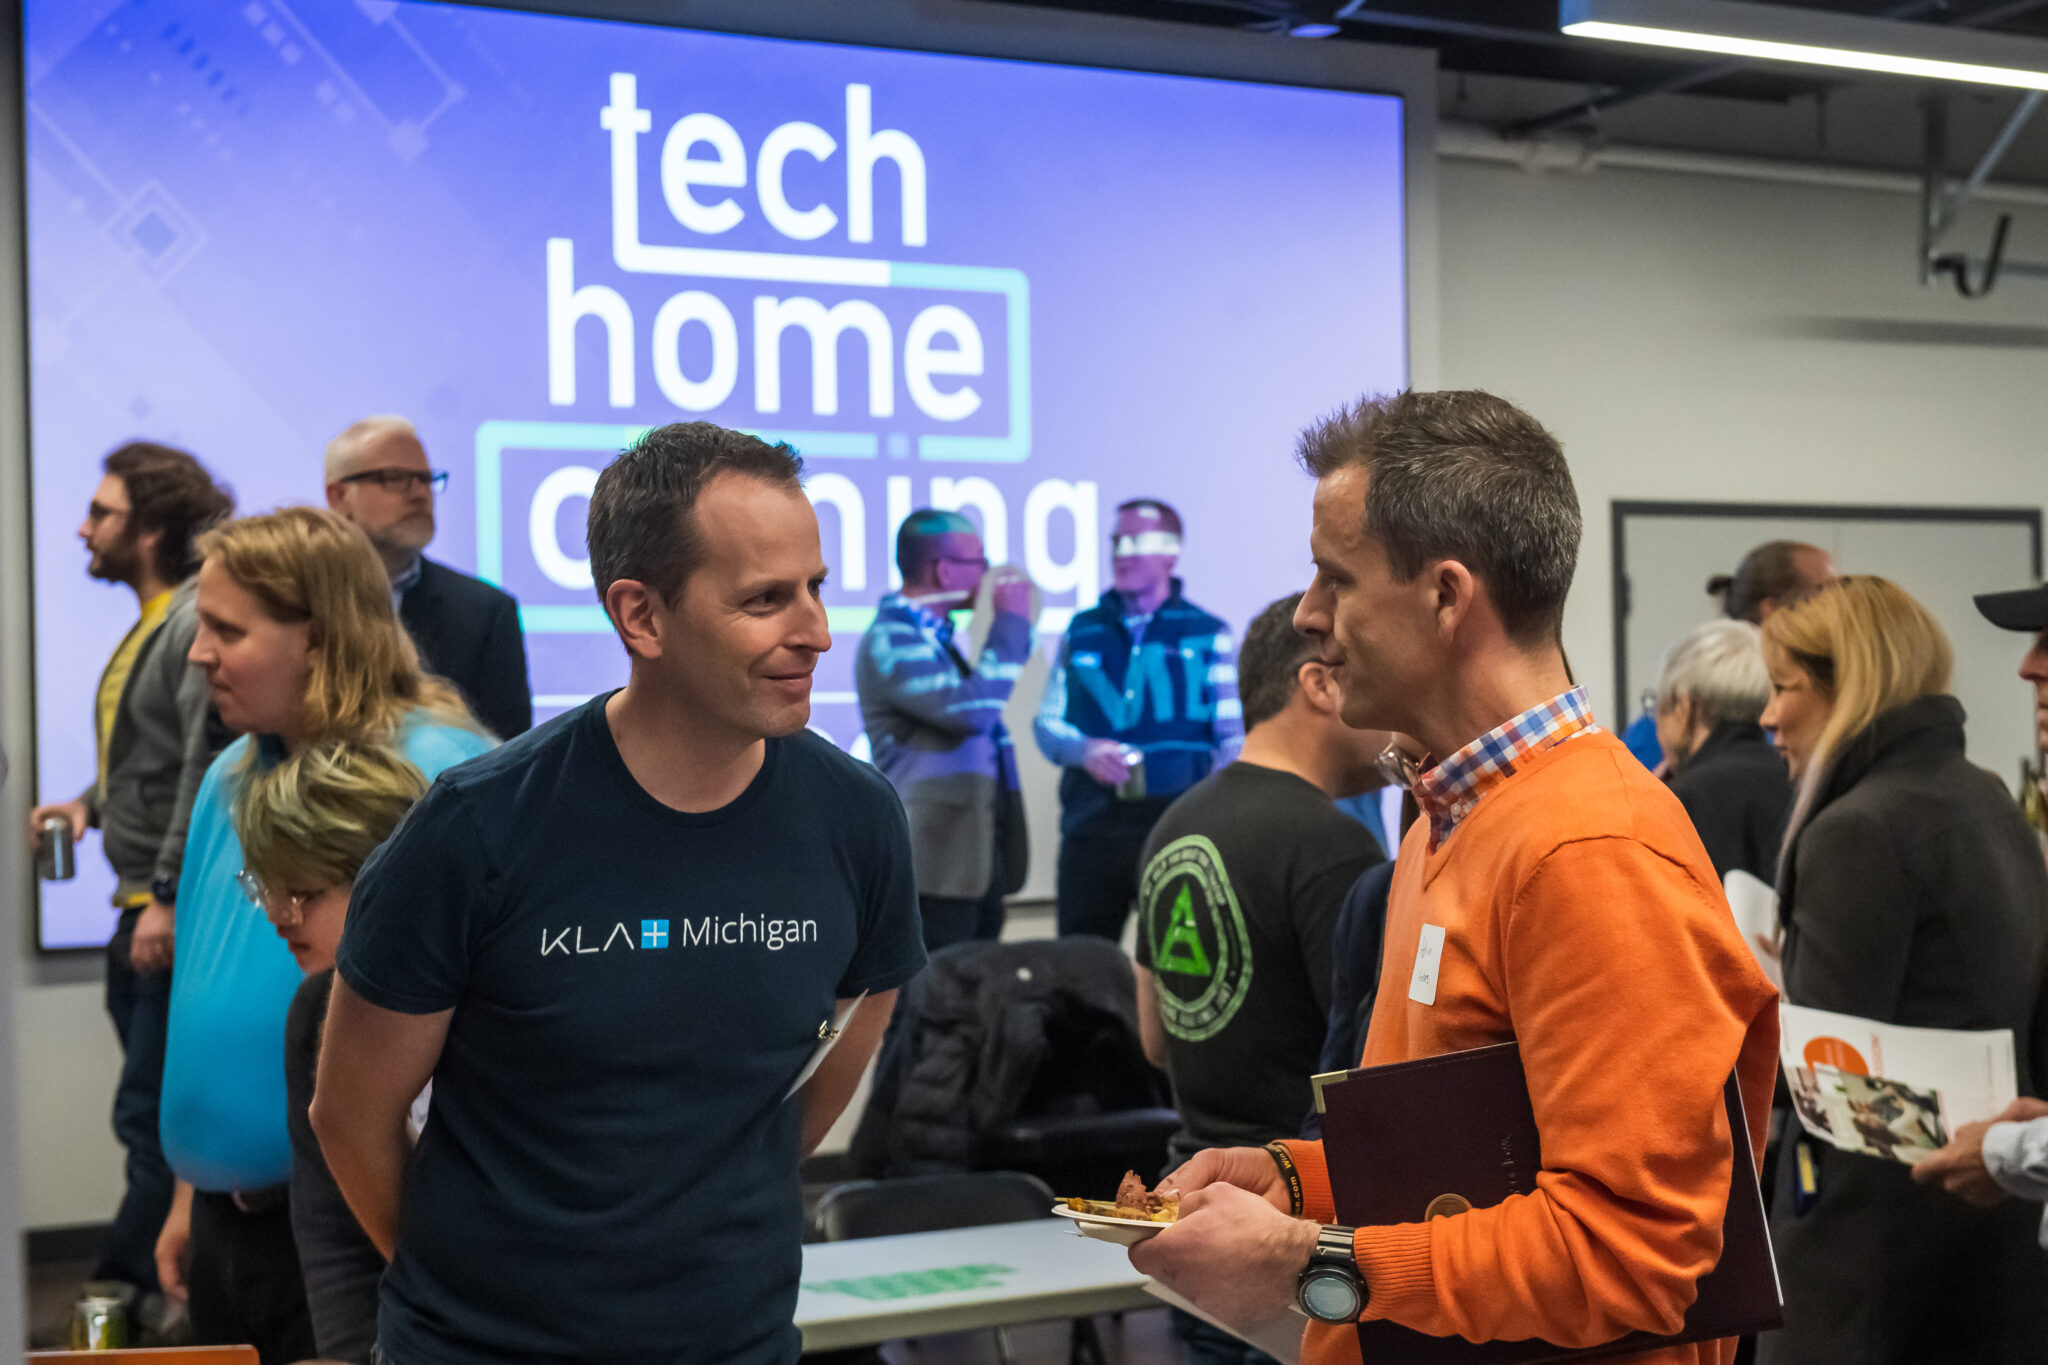 Two men networking at Tech homecoming event in Ann Arbor